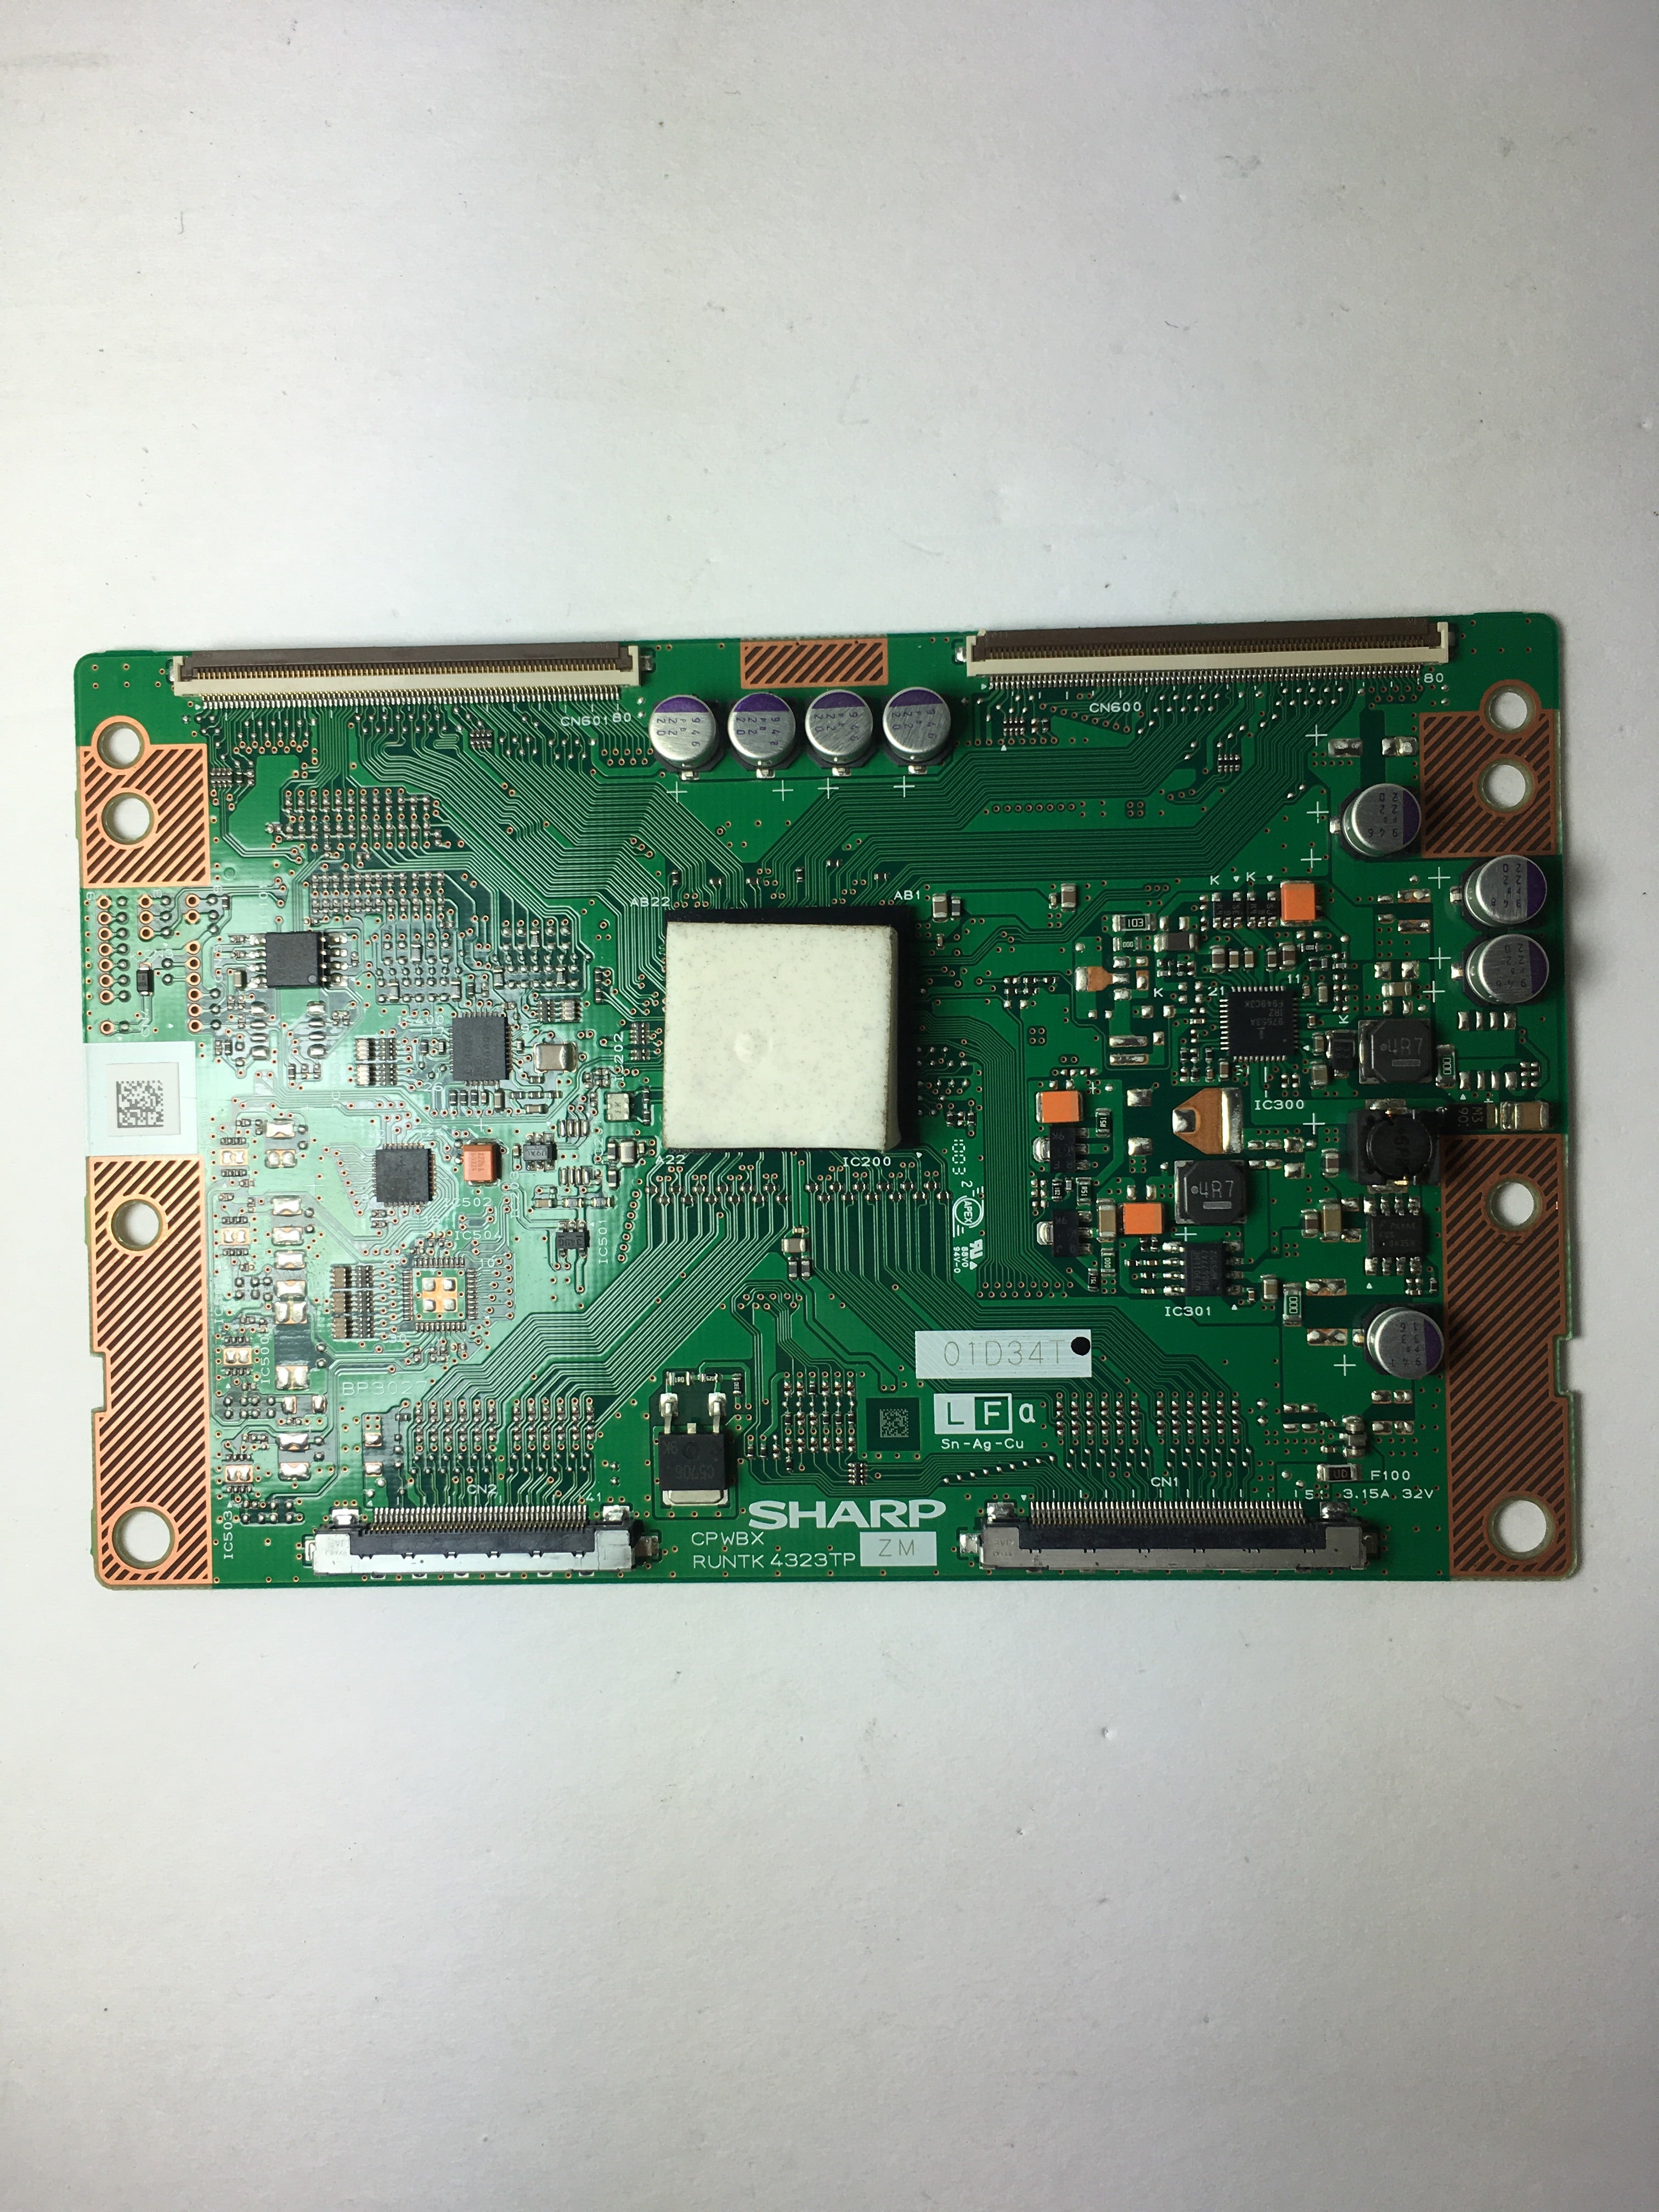 LG RUNTK4323TPZM (CPWBX4323TPZM) T-Con Board for 32LD550-UB